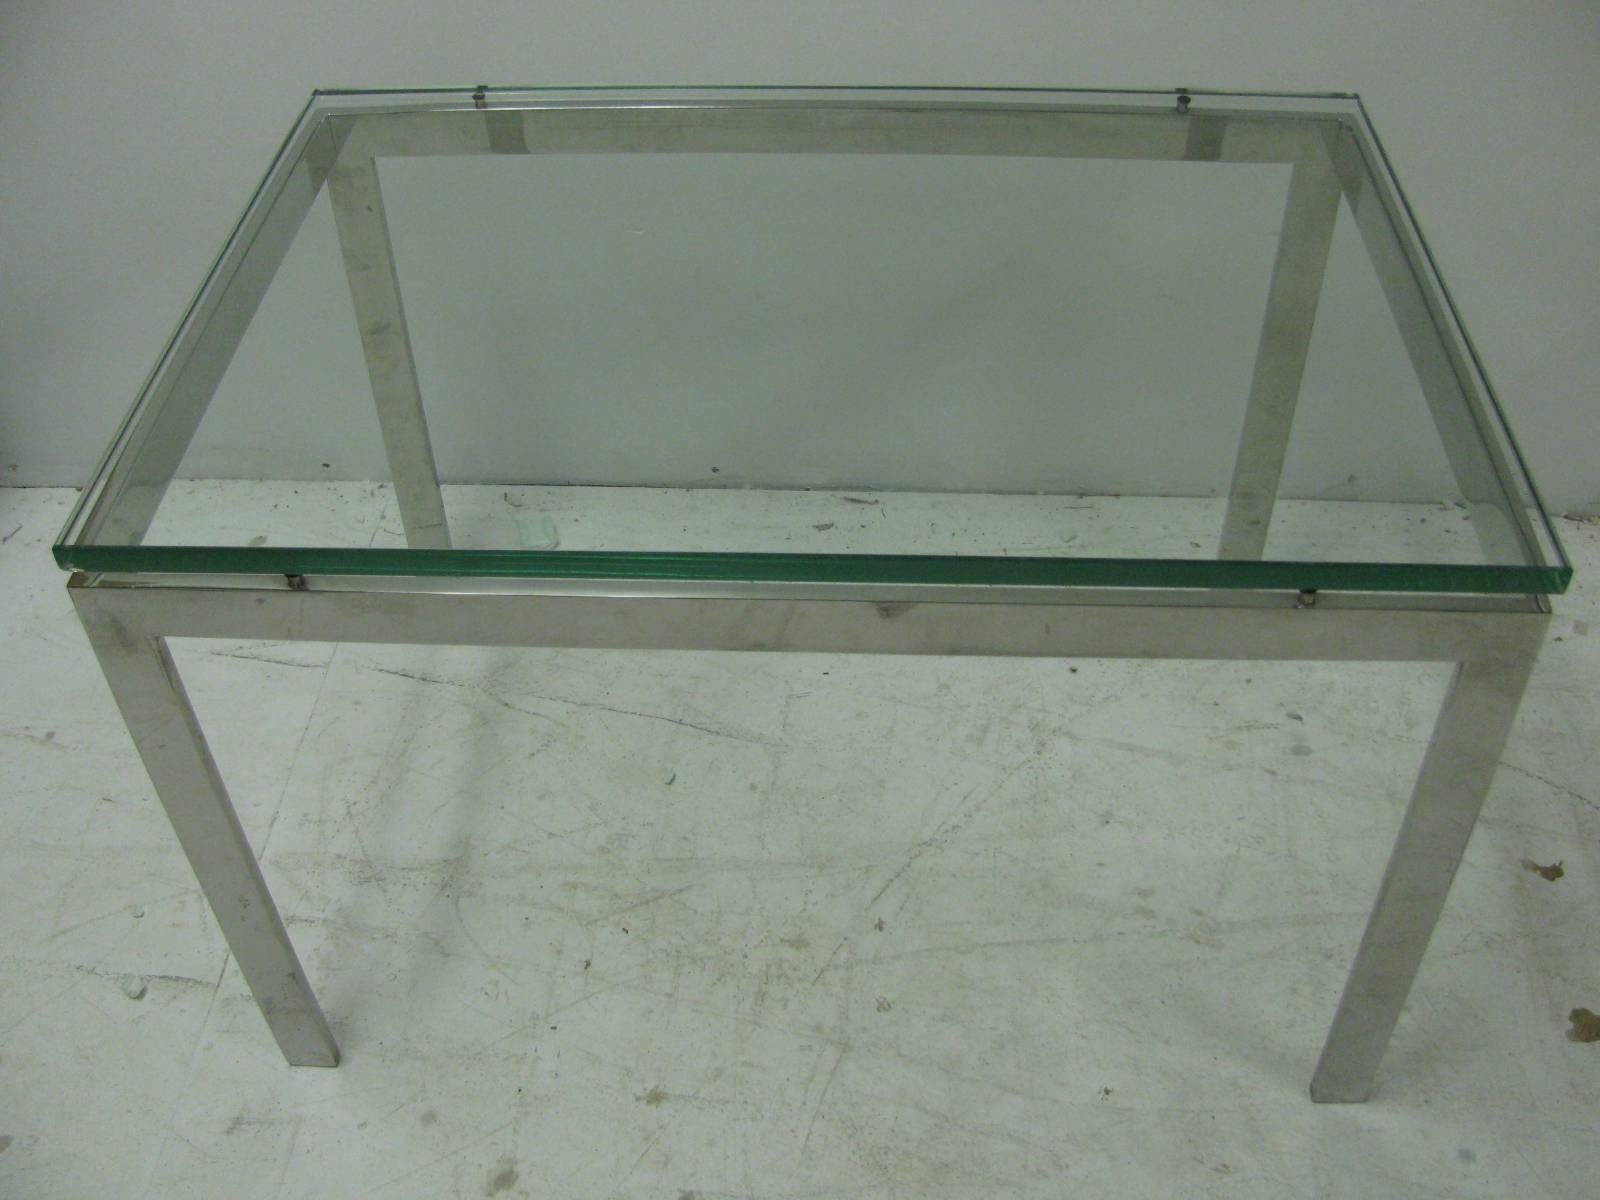 Pair of Mid-Century Modern Nickel Chrome Steel Tables with Dimensional Glass Top For Sale 3